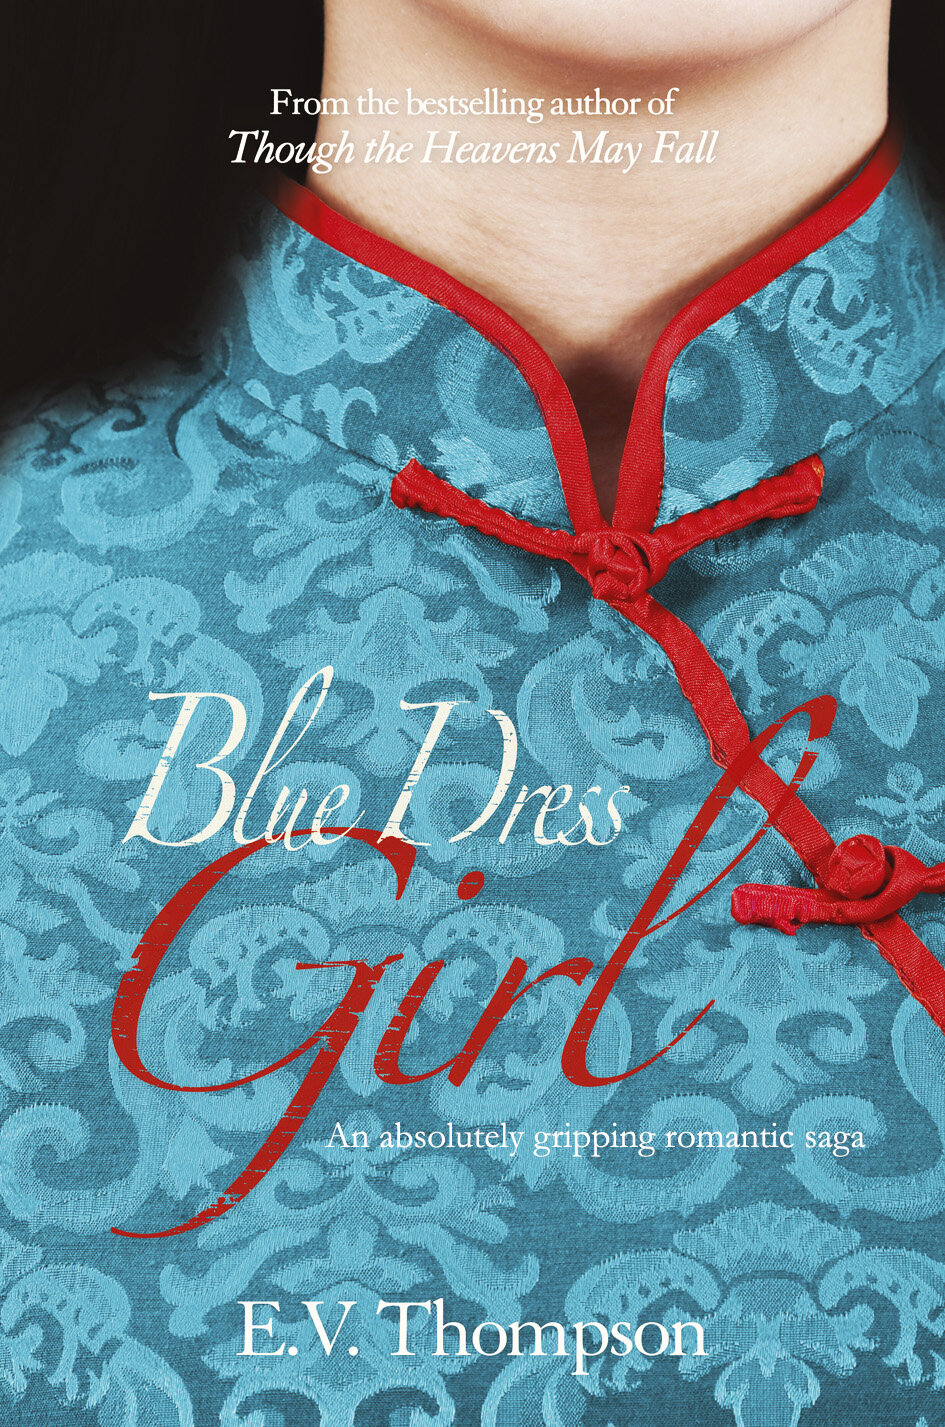 THE BLUE DRESS GIRL PUBLISH COVER with tagline.jpg